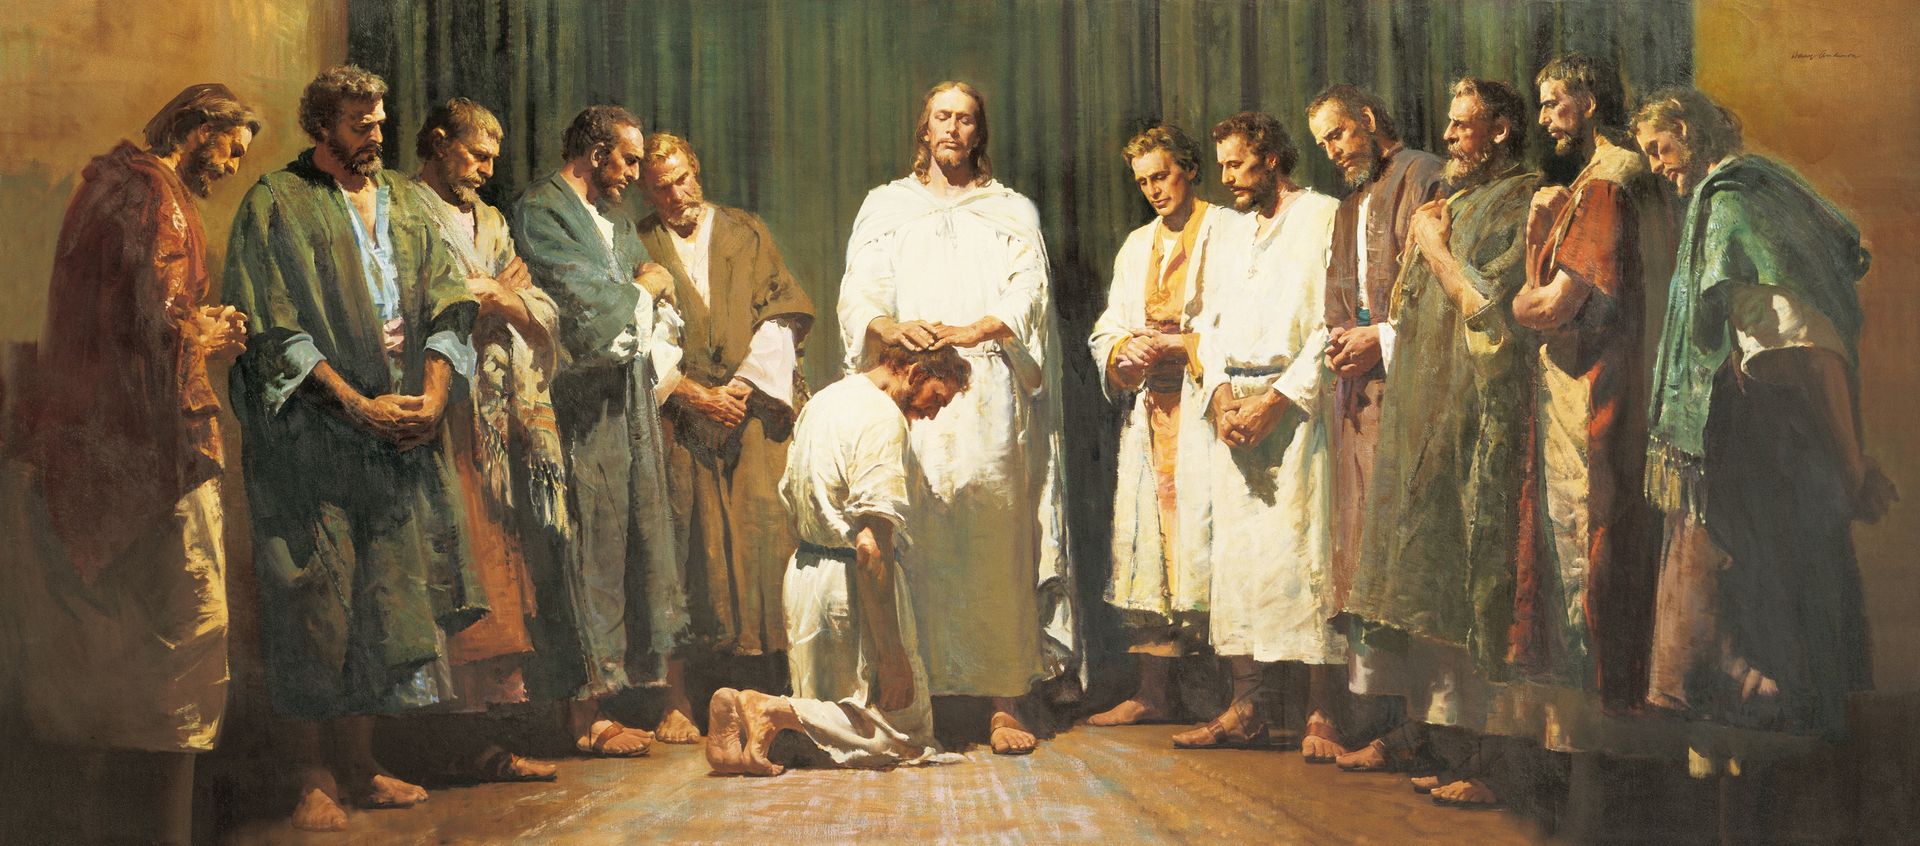 Christ with the twelve men chosen by Him to be His Apostles. Christ has His hands upon the head of one of the men (who kneels before Him) as He ordains the man to be an Apostle. The other eleven Apostles are standing to the left and right of Christ.